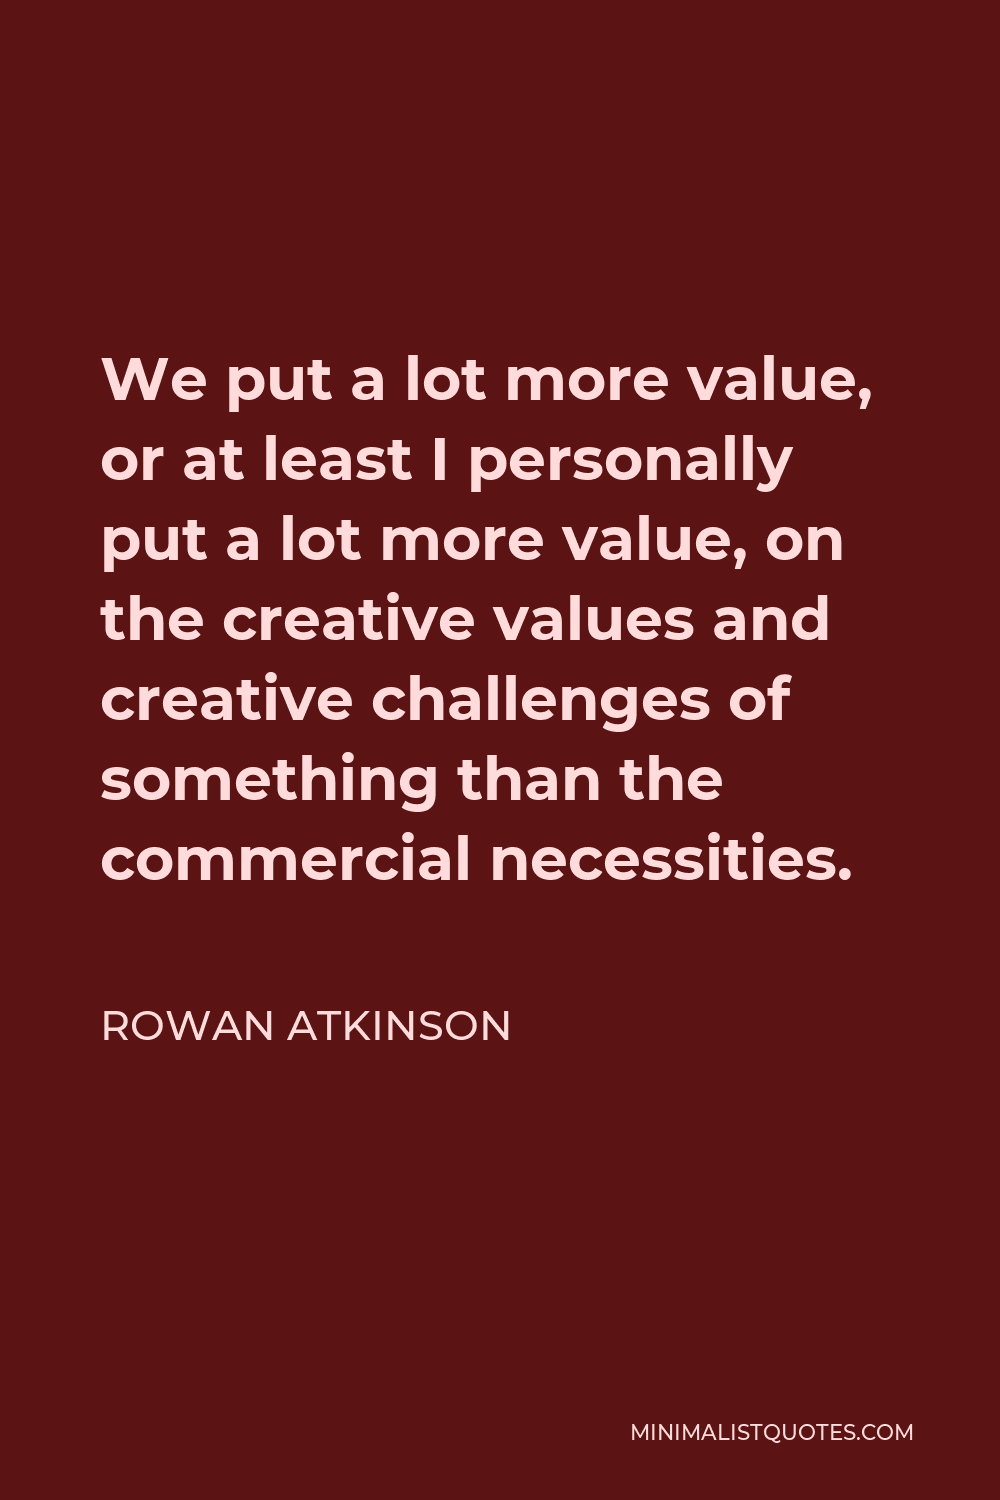 Rowan Atkinson Quote - We put a lot more value, or at least I personally put a lot more value, on the creative values and creative challenges of something than the commercial necessities.